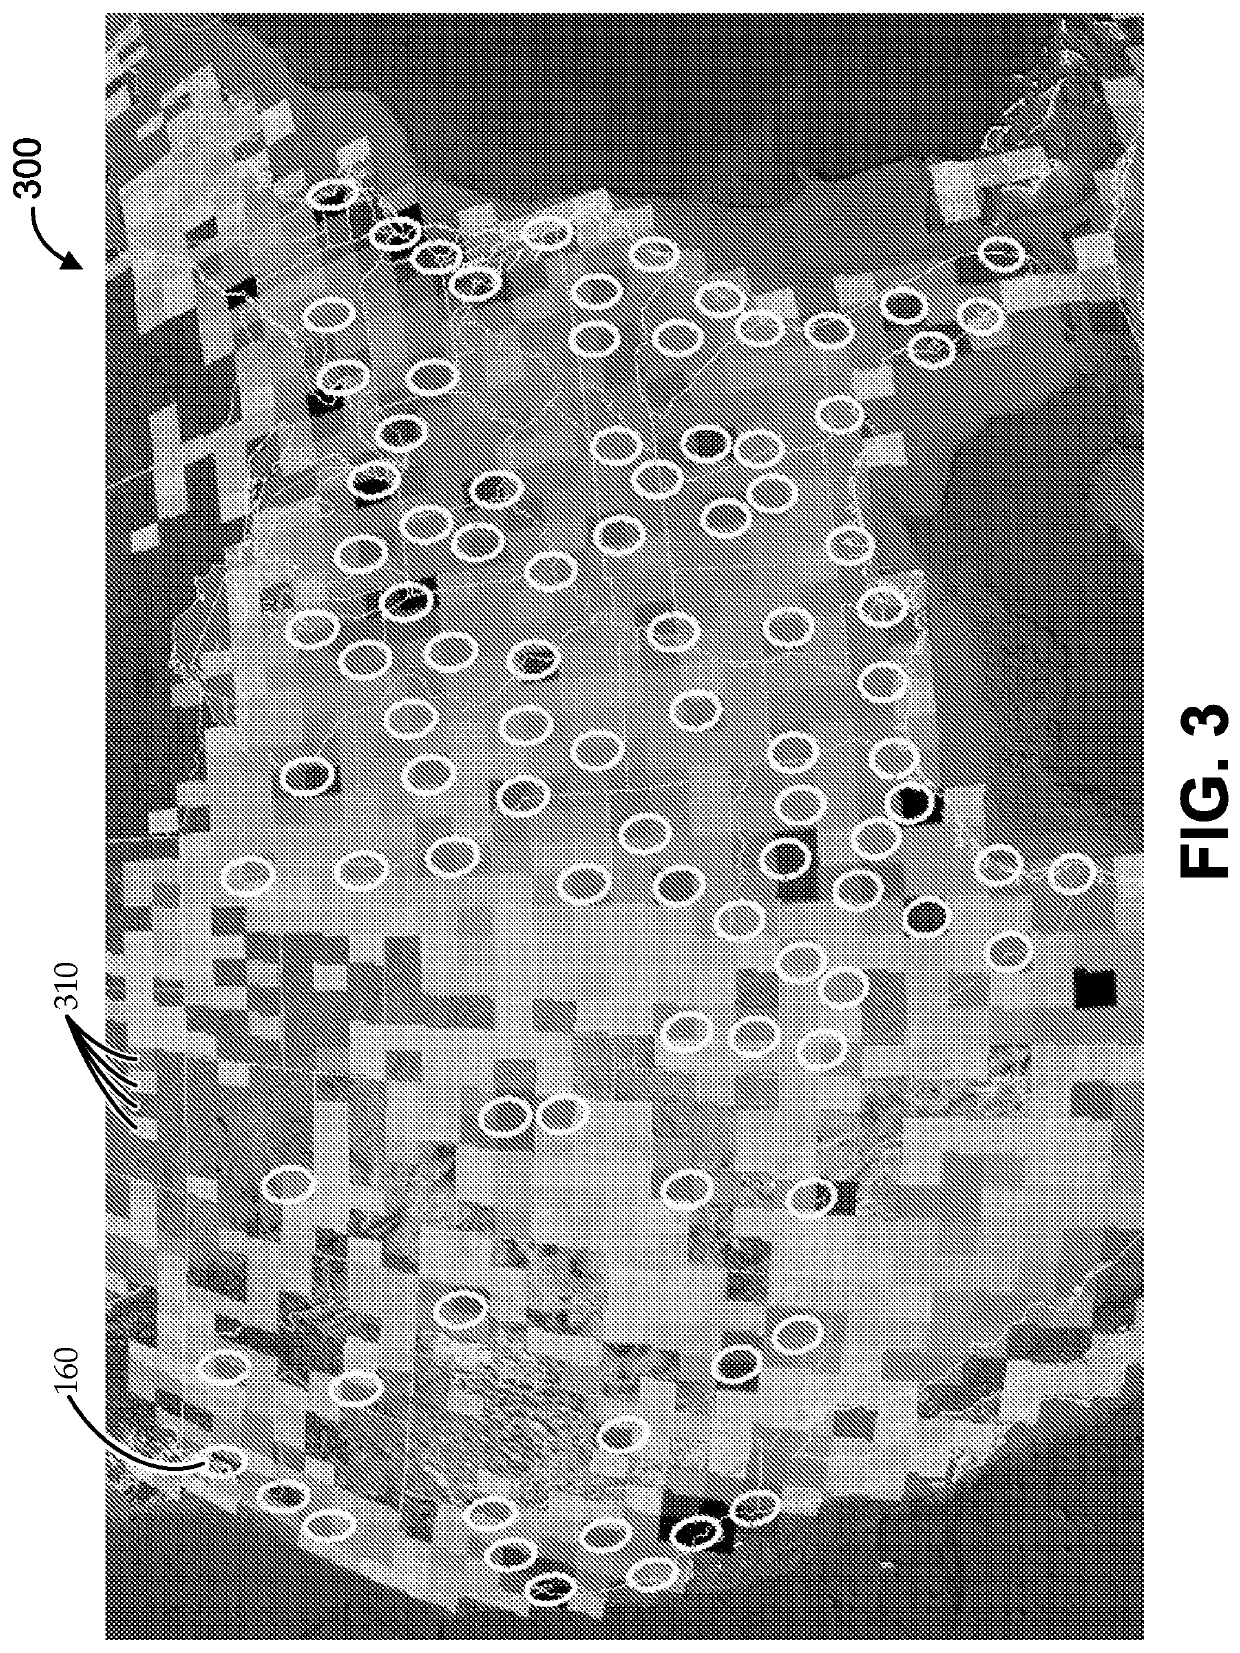 High-throughput satellite with sparse fixed user beam coverage